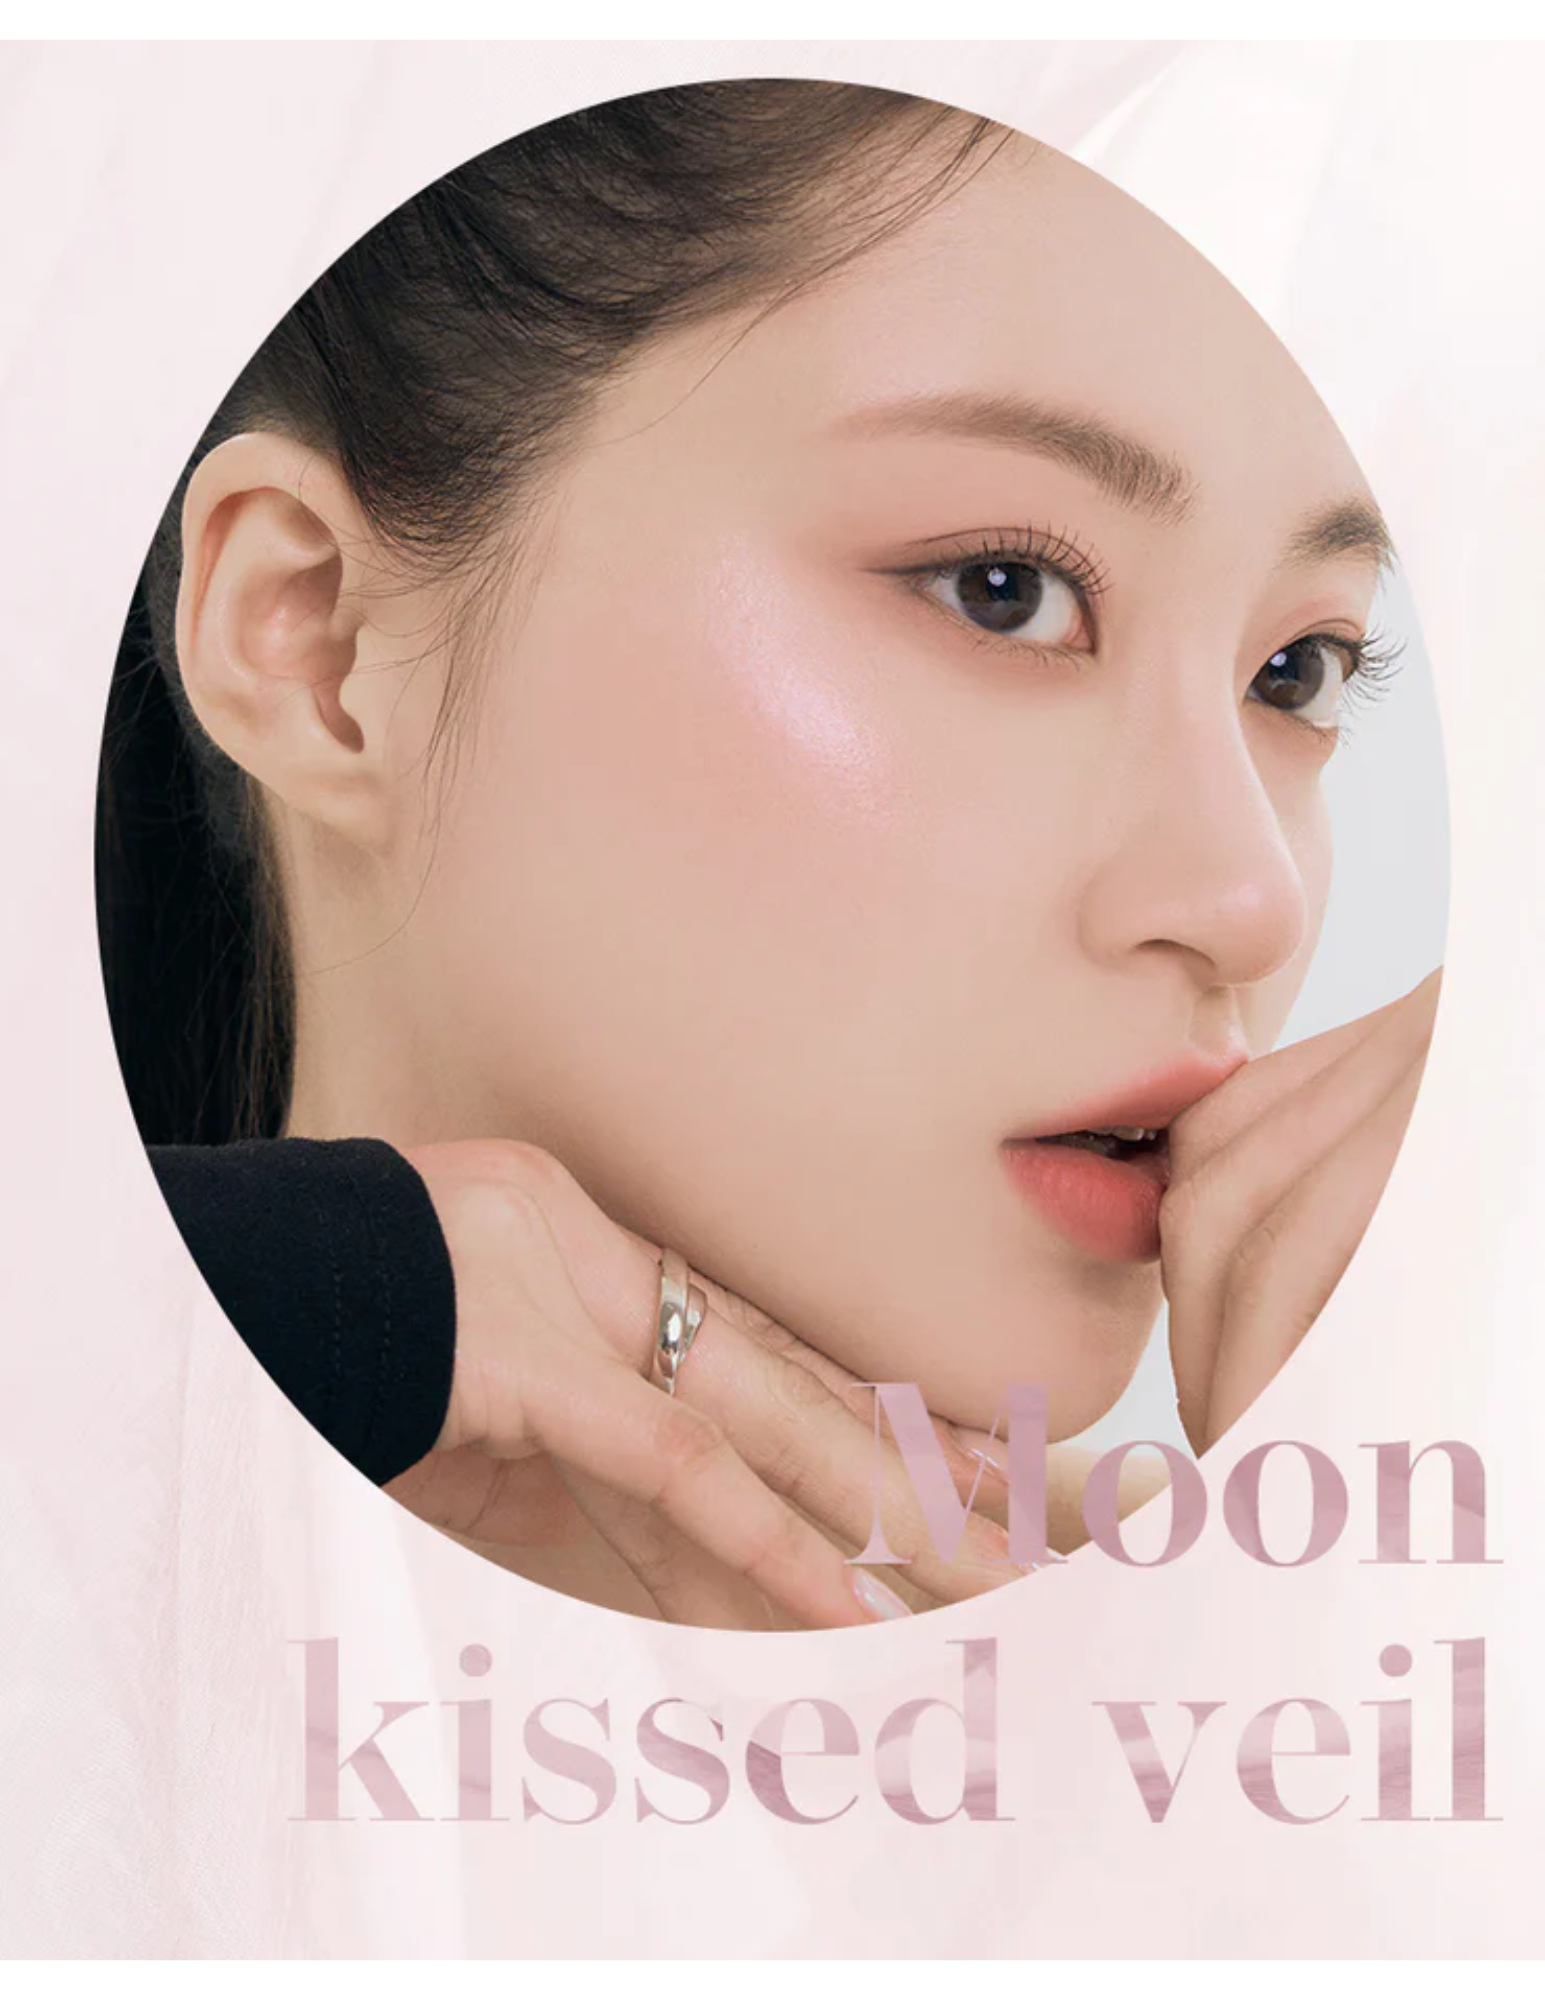 Rom&nd See Through the Veilighter | 02 Moon Kissed Veil